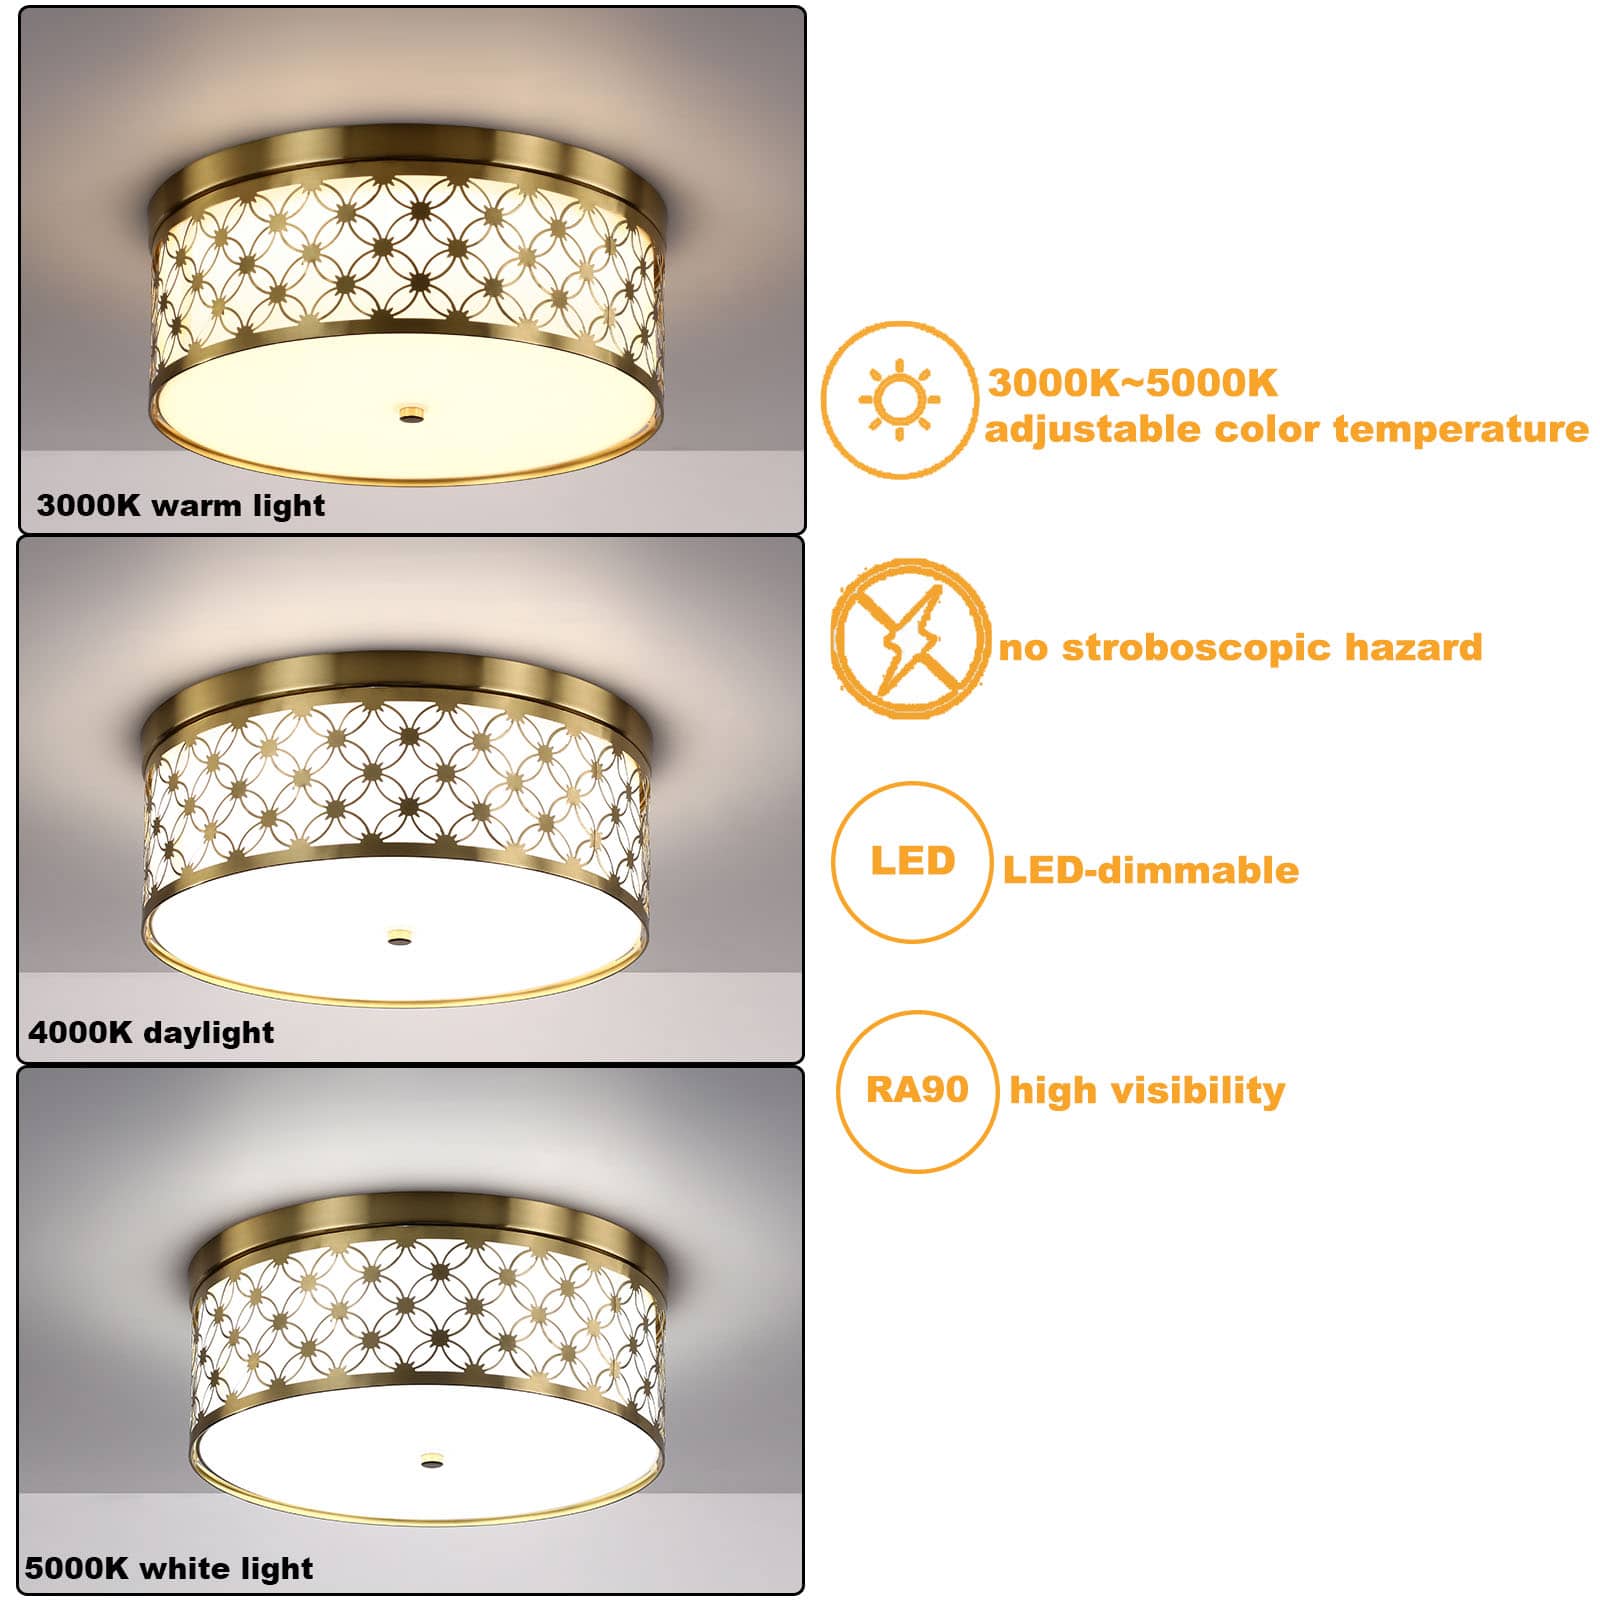 Modern 11'' Round Drum Shade Brushed Gold Dimmable LED Ceiling Light Hallway Light Fixtures